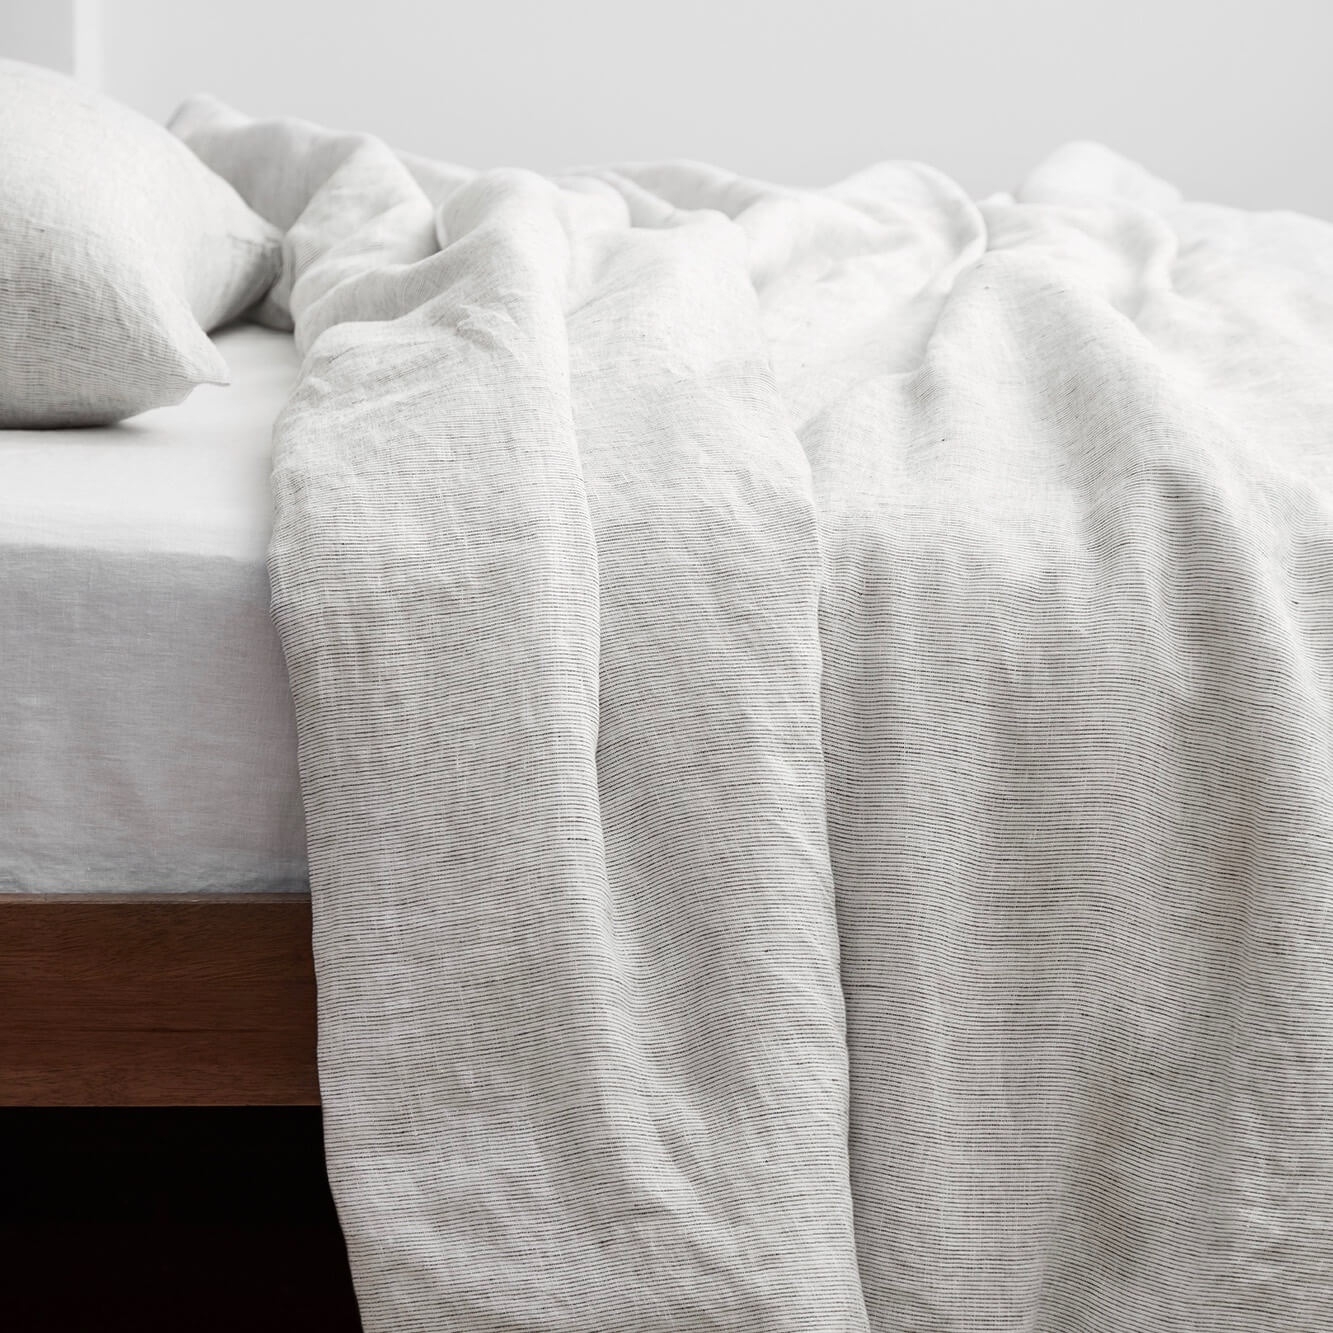 The Citizenry Stonewashed Linen Duvet Cover | King/Cal King | Duvet Only | Solid Sand - Image 1